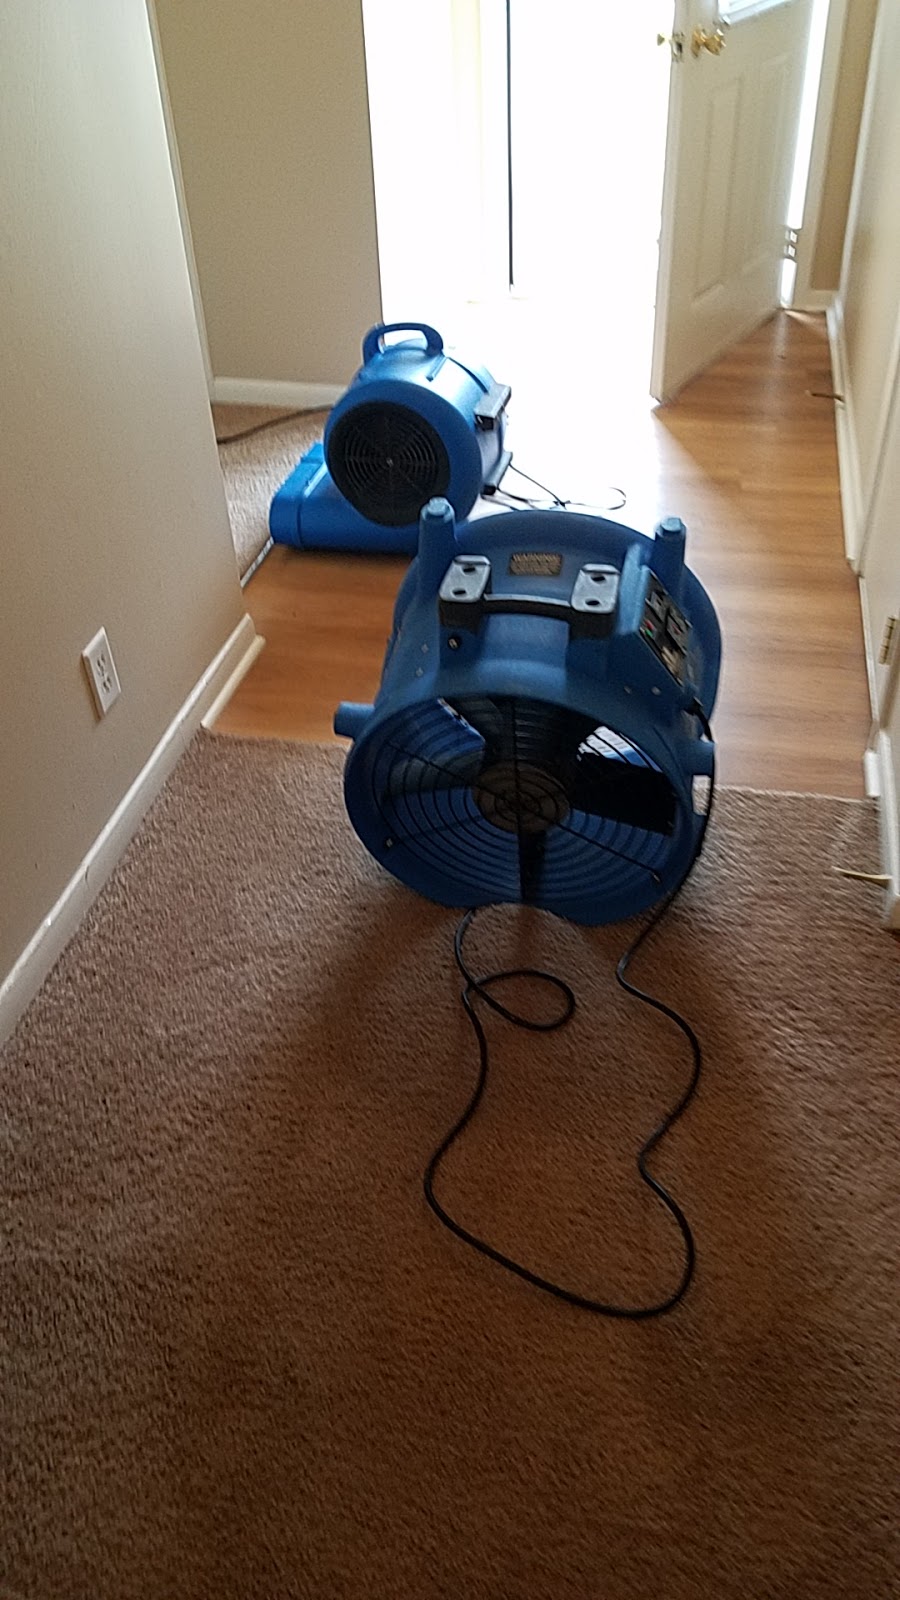 Inspection Ready Carpet Cleaning | 2819 Bryan Ave, Bellevue, NE 68005, USA | Phone: (402) 999-3020